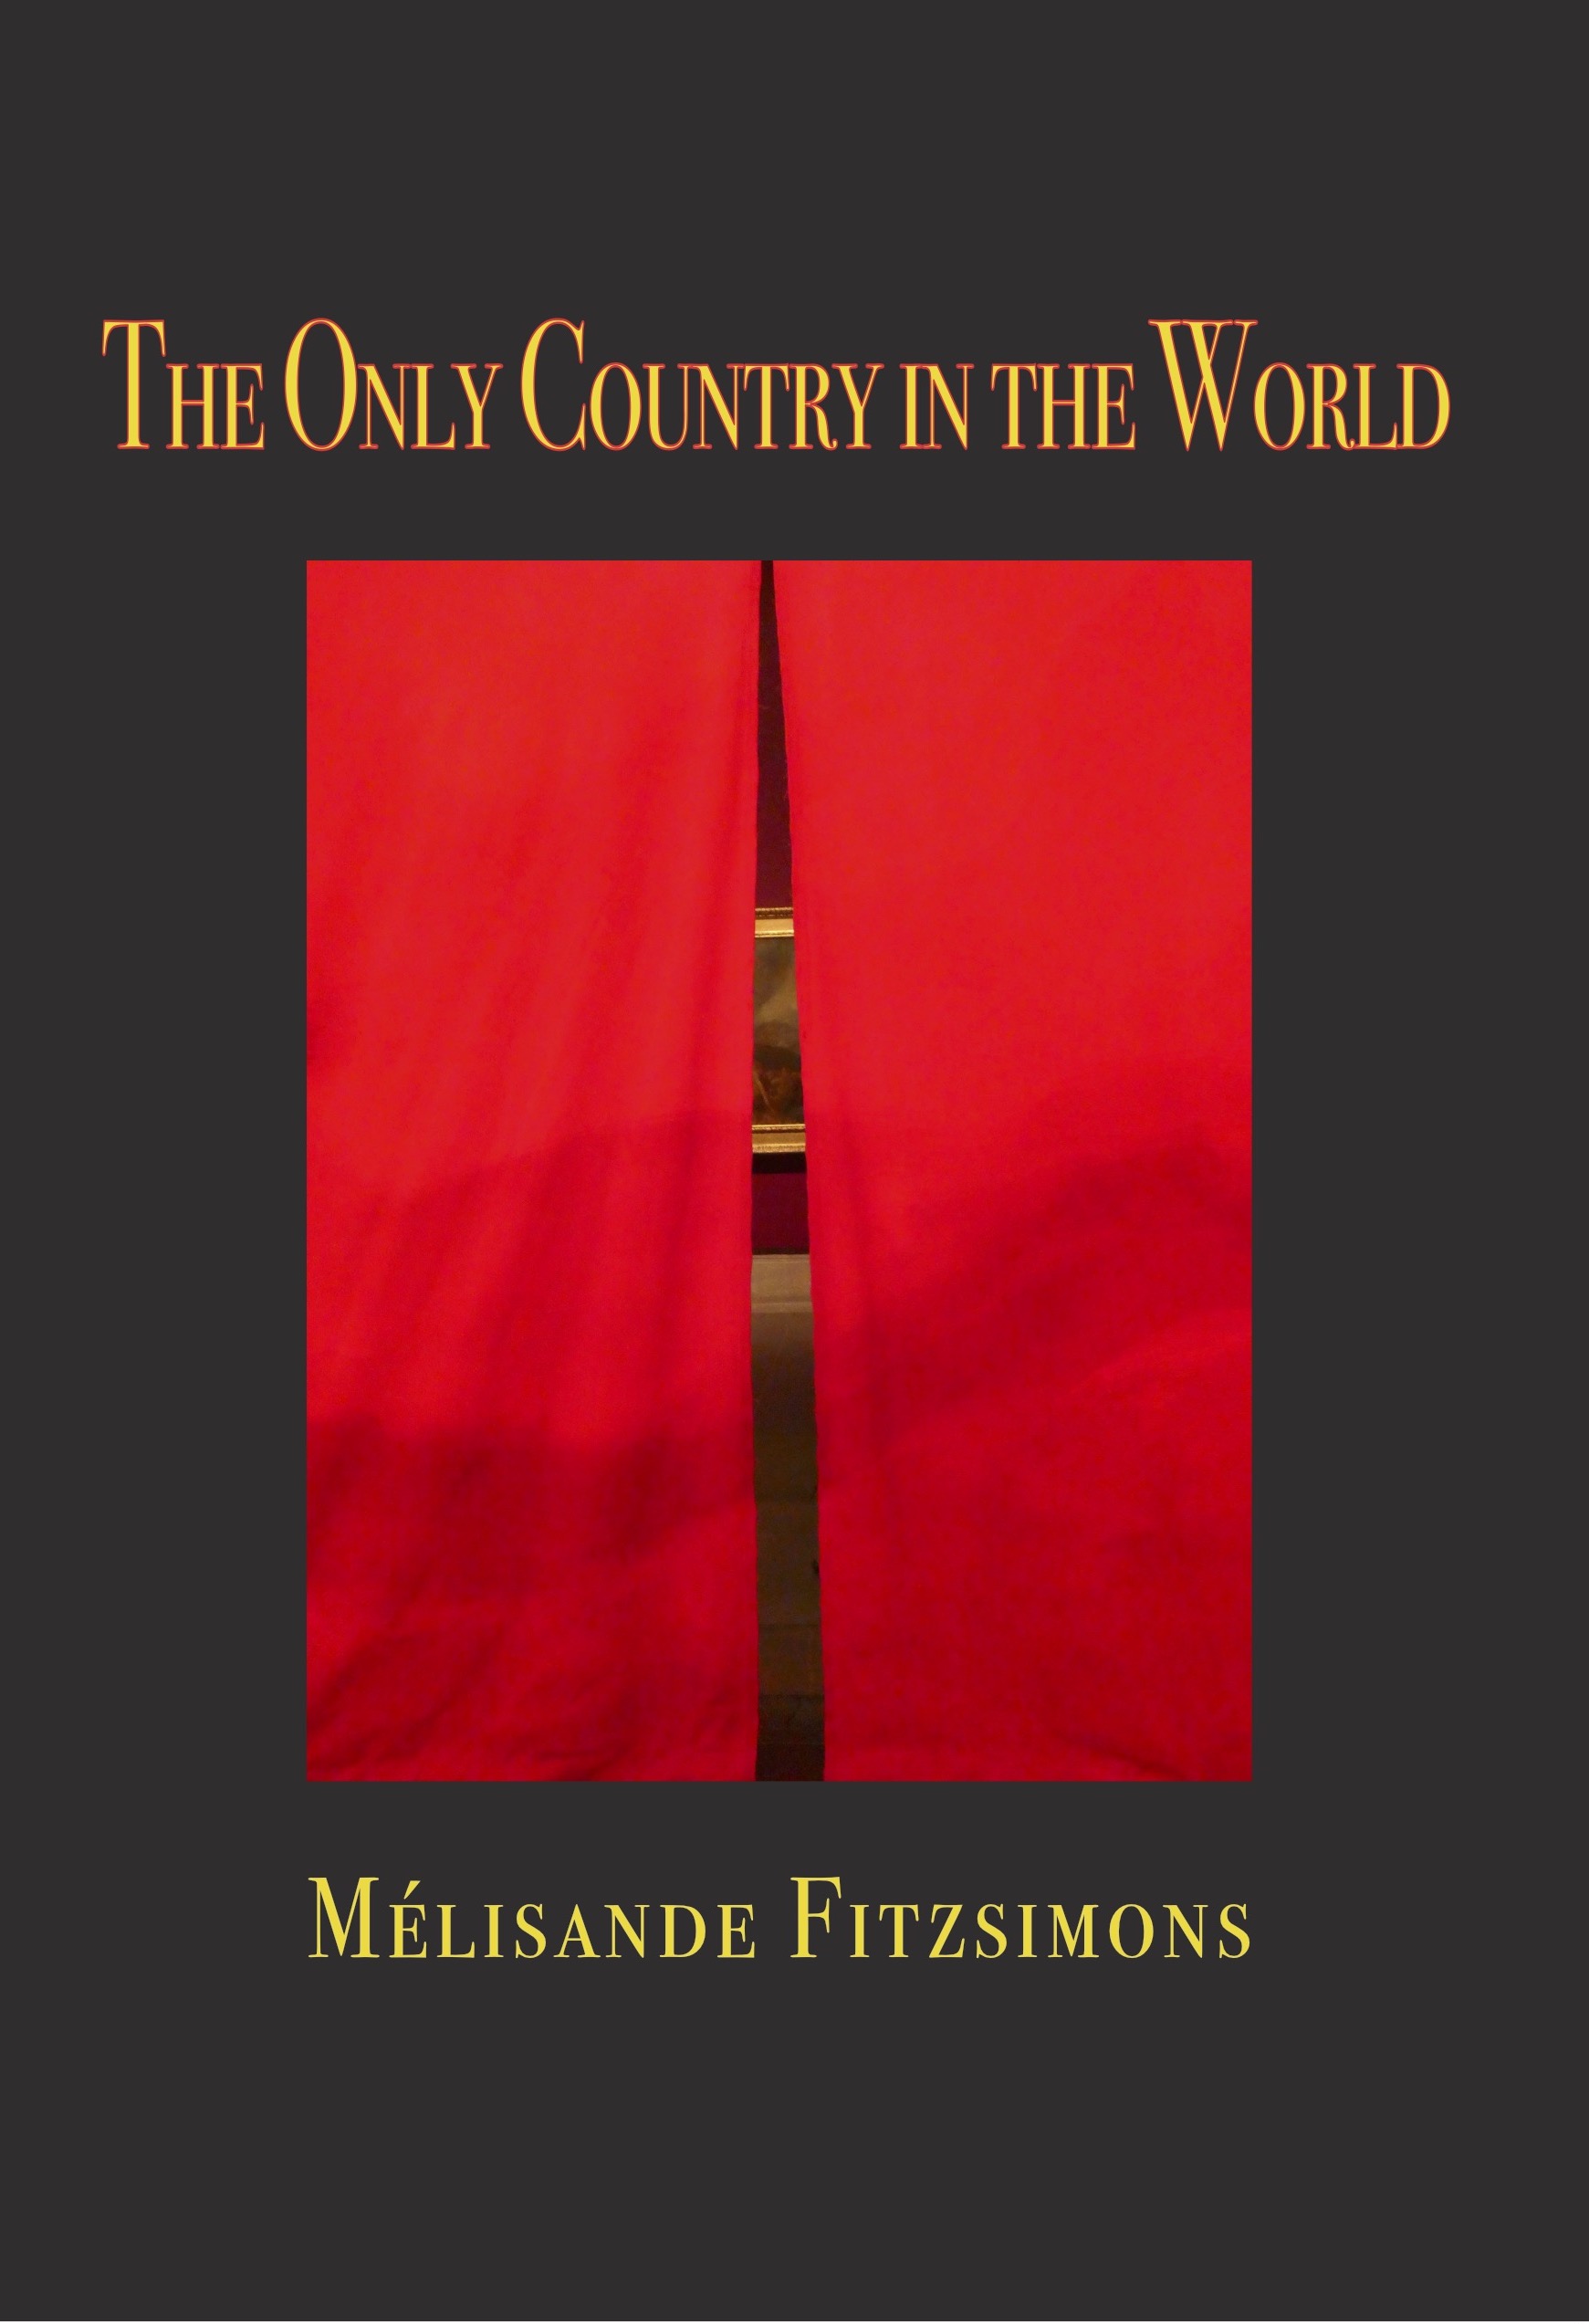 Mélisande Fitzsimons: The Only Country in the World – Glasfryn Project